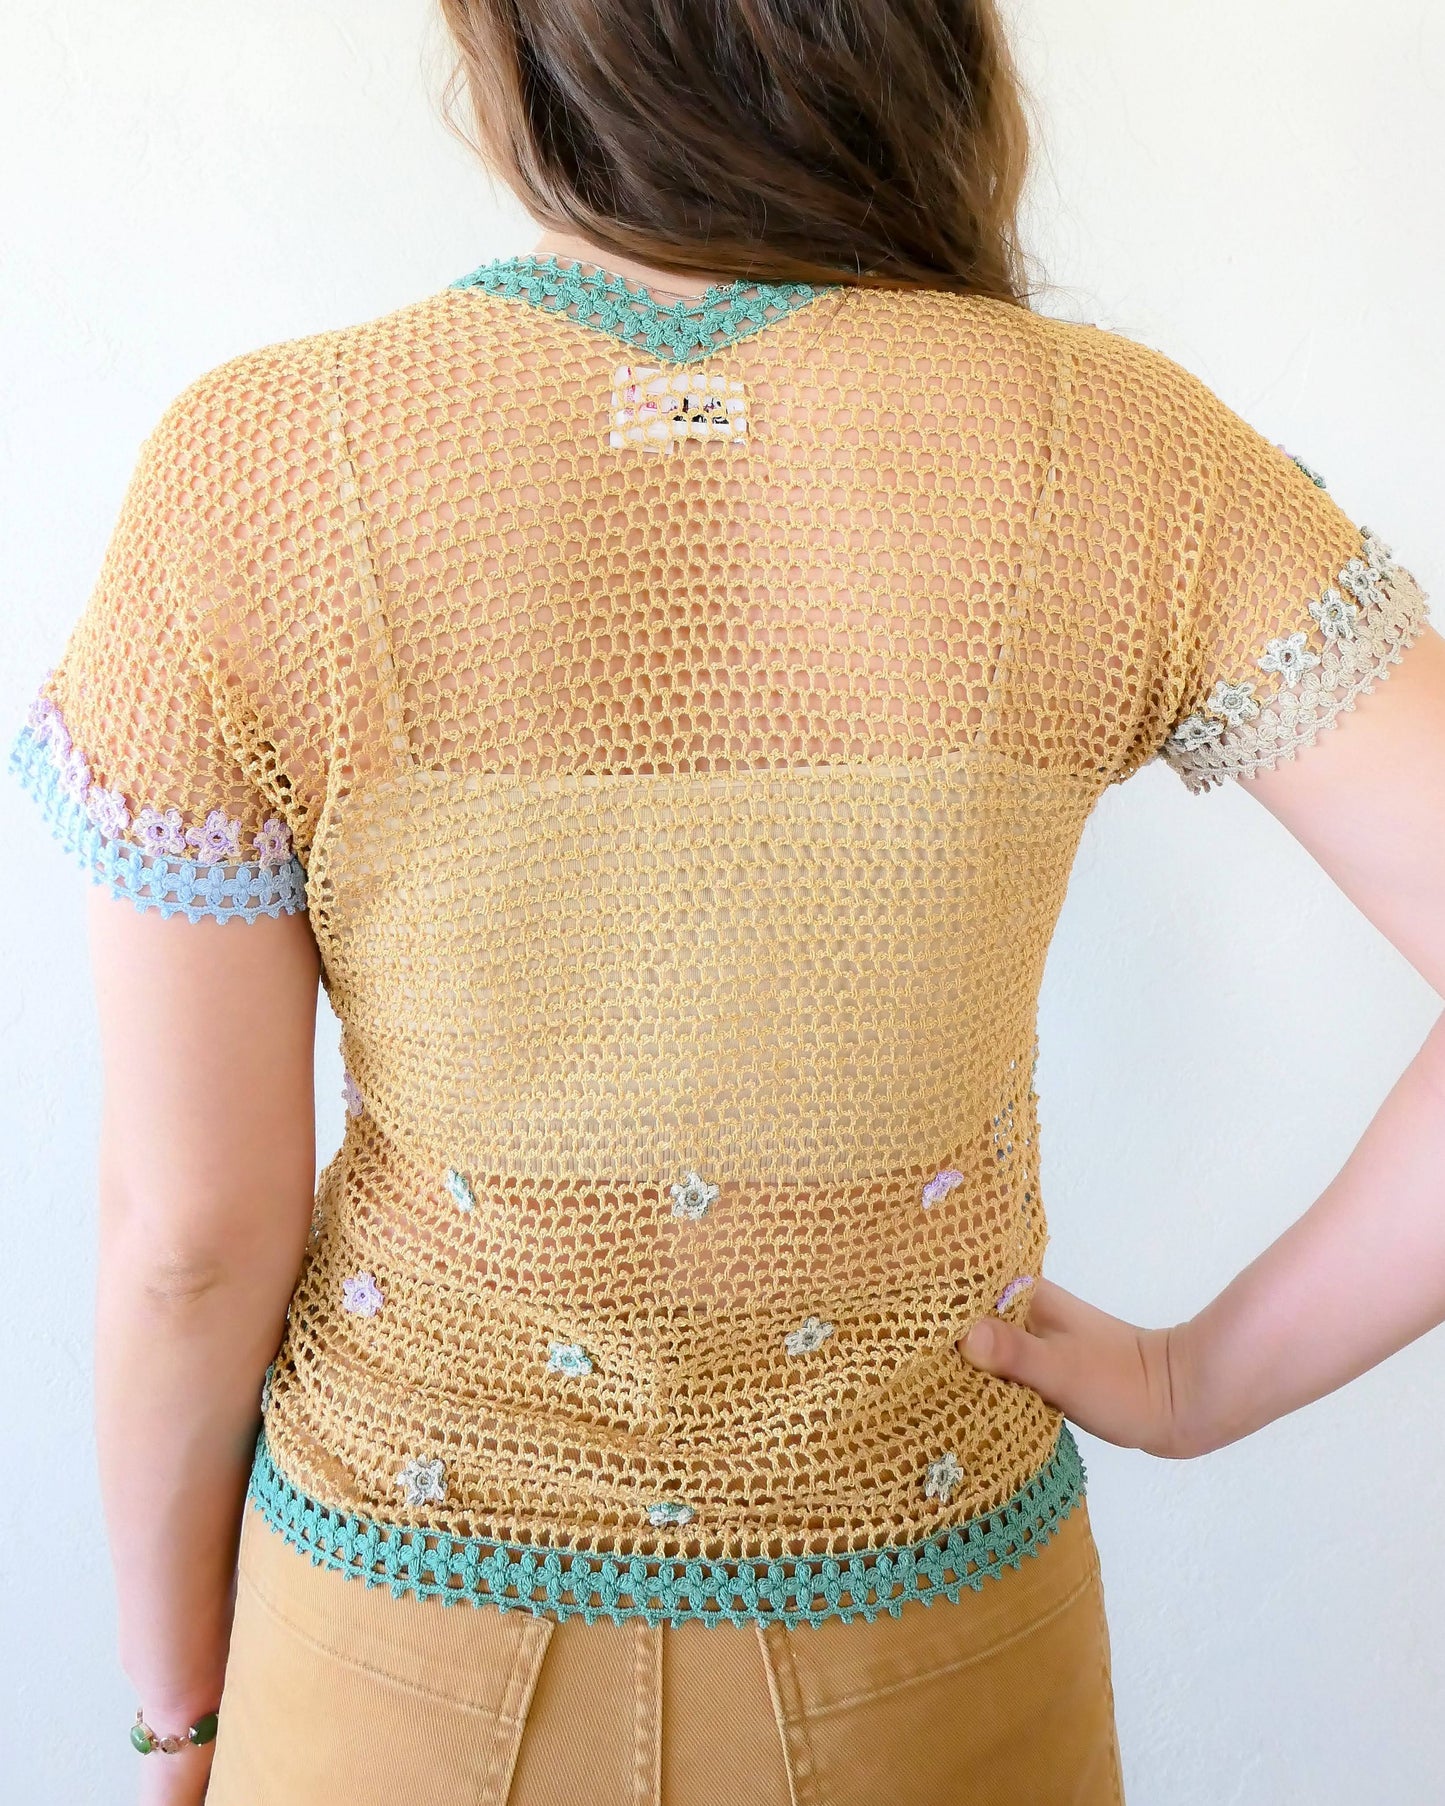 Back view of top.  The bottom hem is made with a horizontal stripe of forest green colored crochet flowers.  